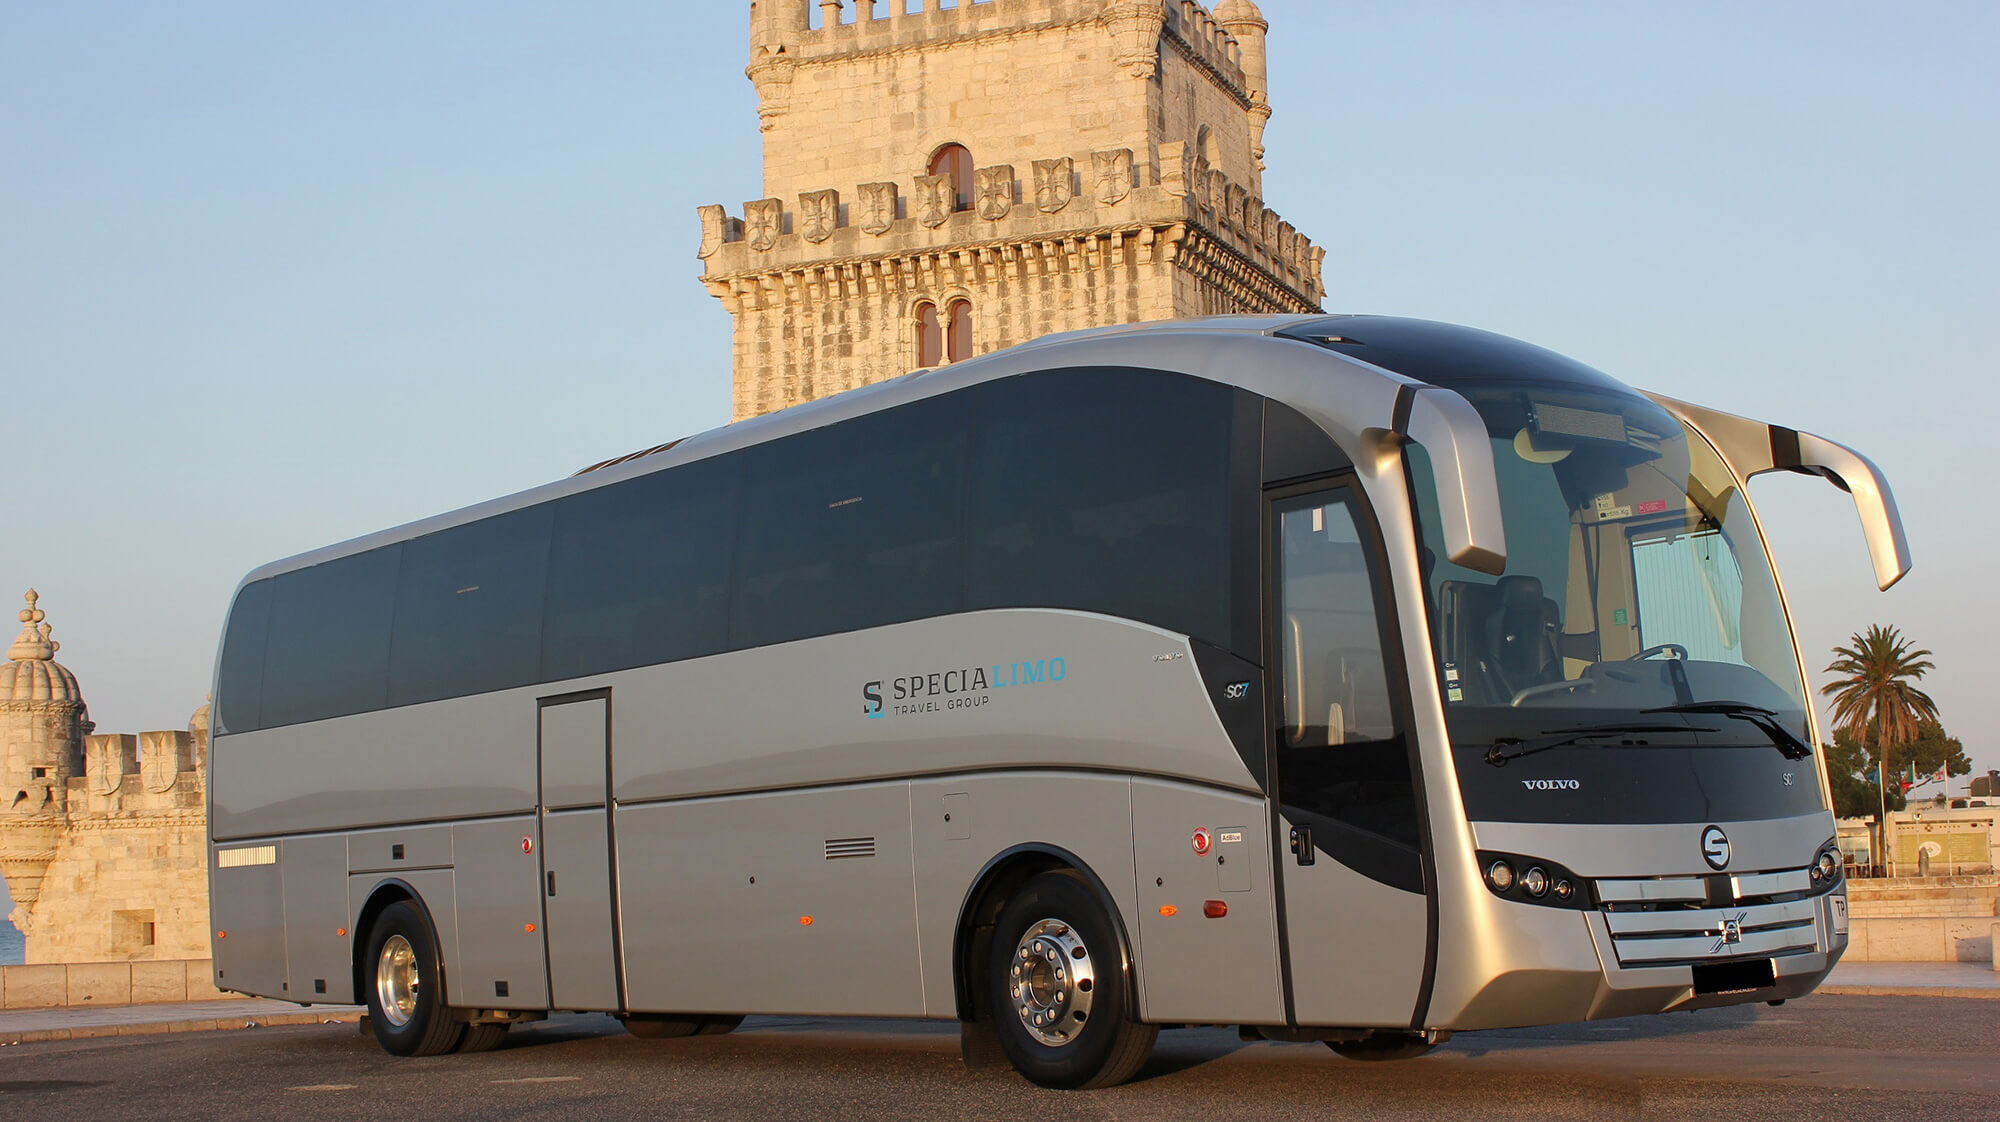 Hire a 55 seater Luxury VIP Coach (Volvo Sumsundegui 2017) from SPECIALIMO TRAVEL GROUP in Almargem do Bispo, Sintra 